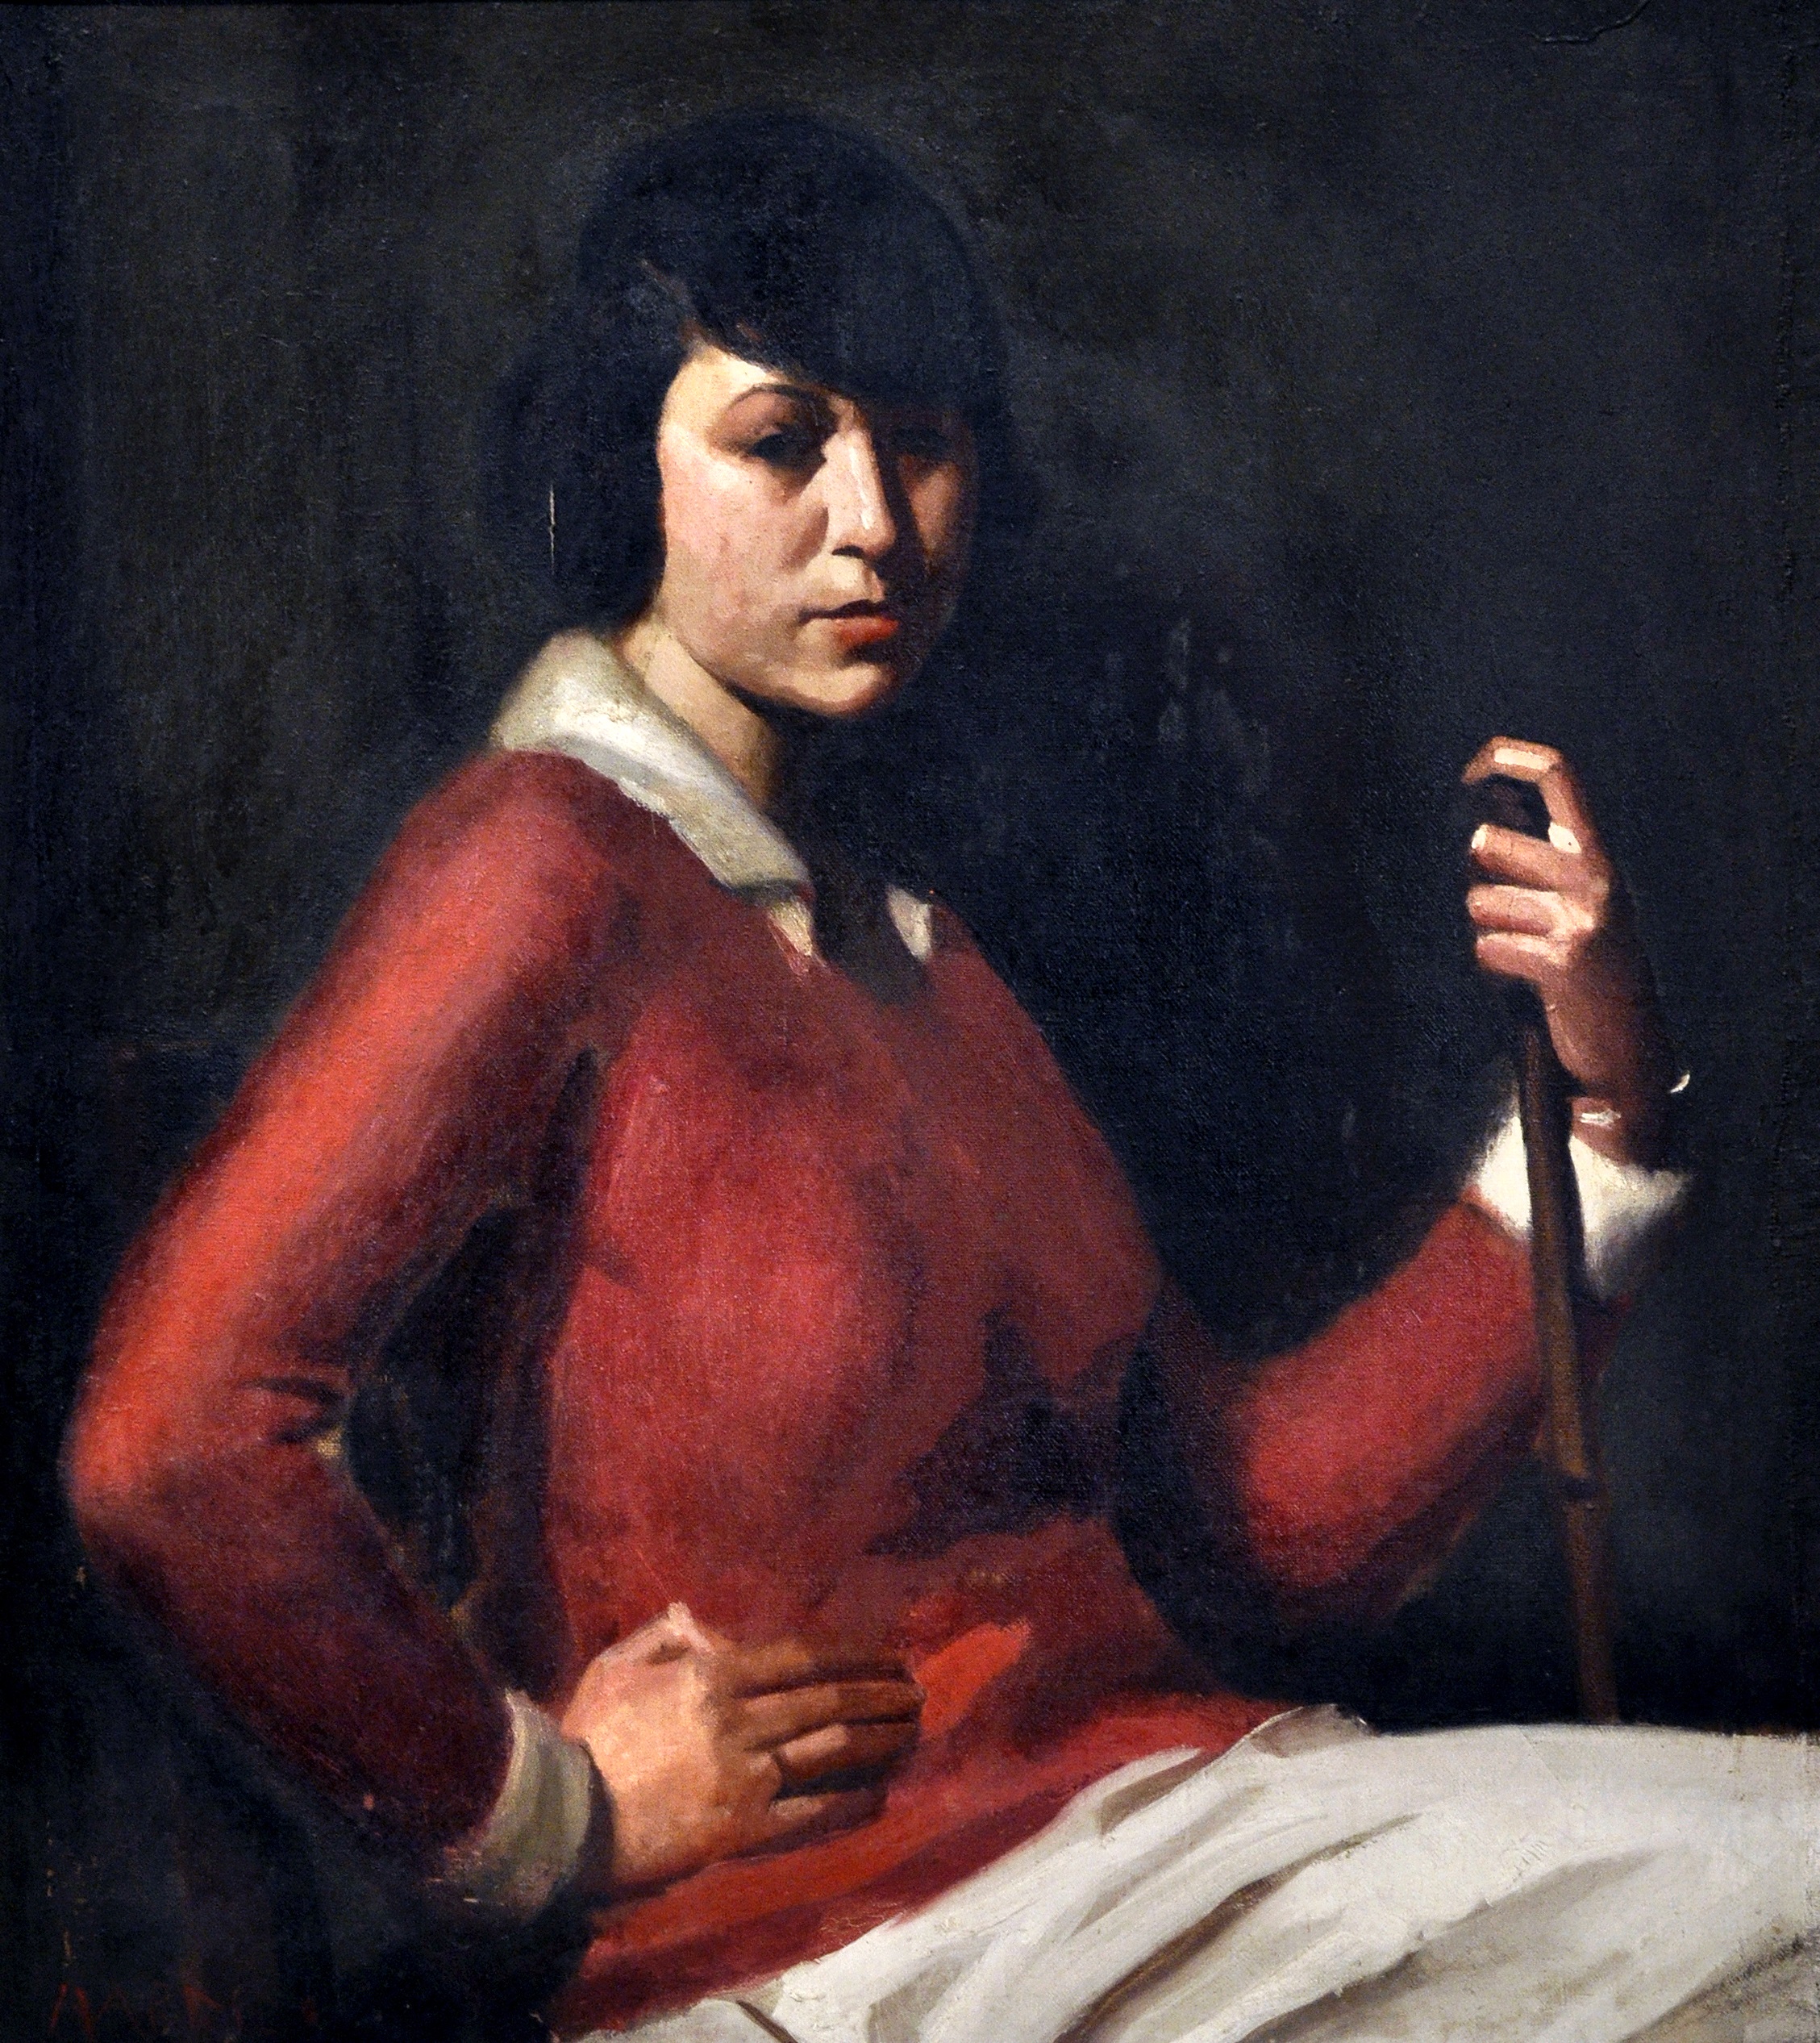 Unknown._Untitled_portrait_of_a_girl_in_red_top_holding_a_staff_1909_Oil_on_canvas.jpg